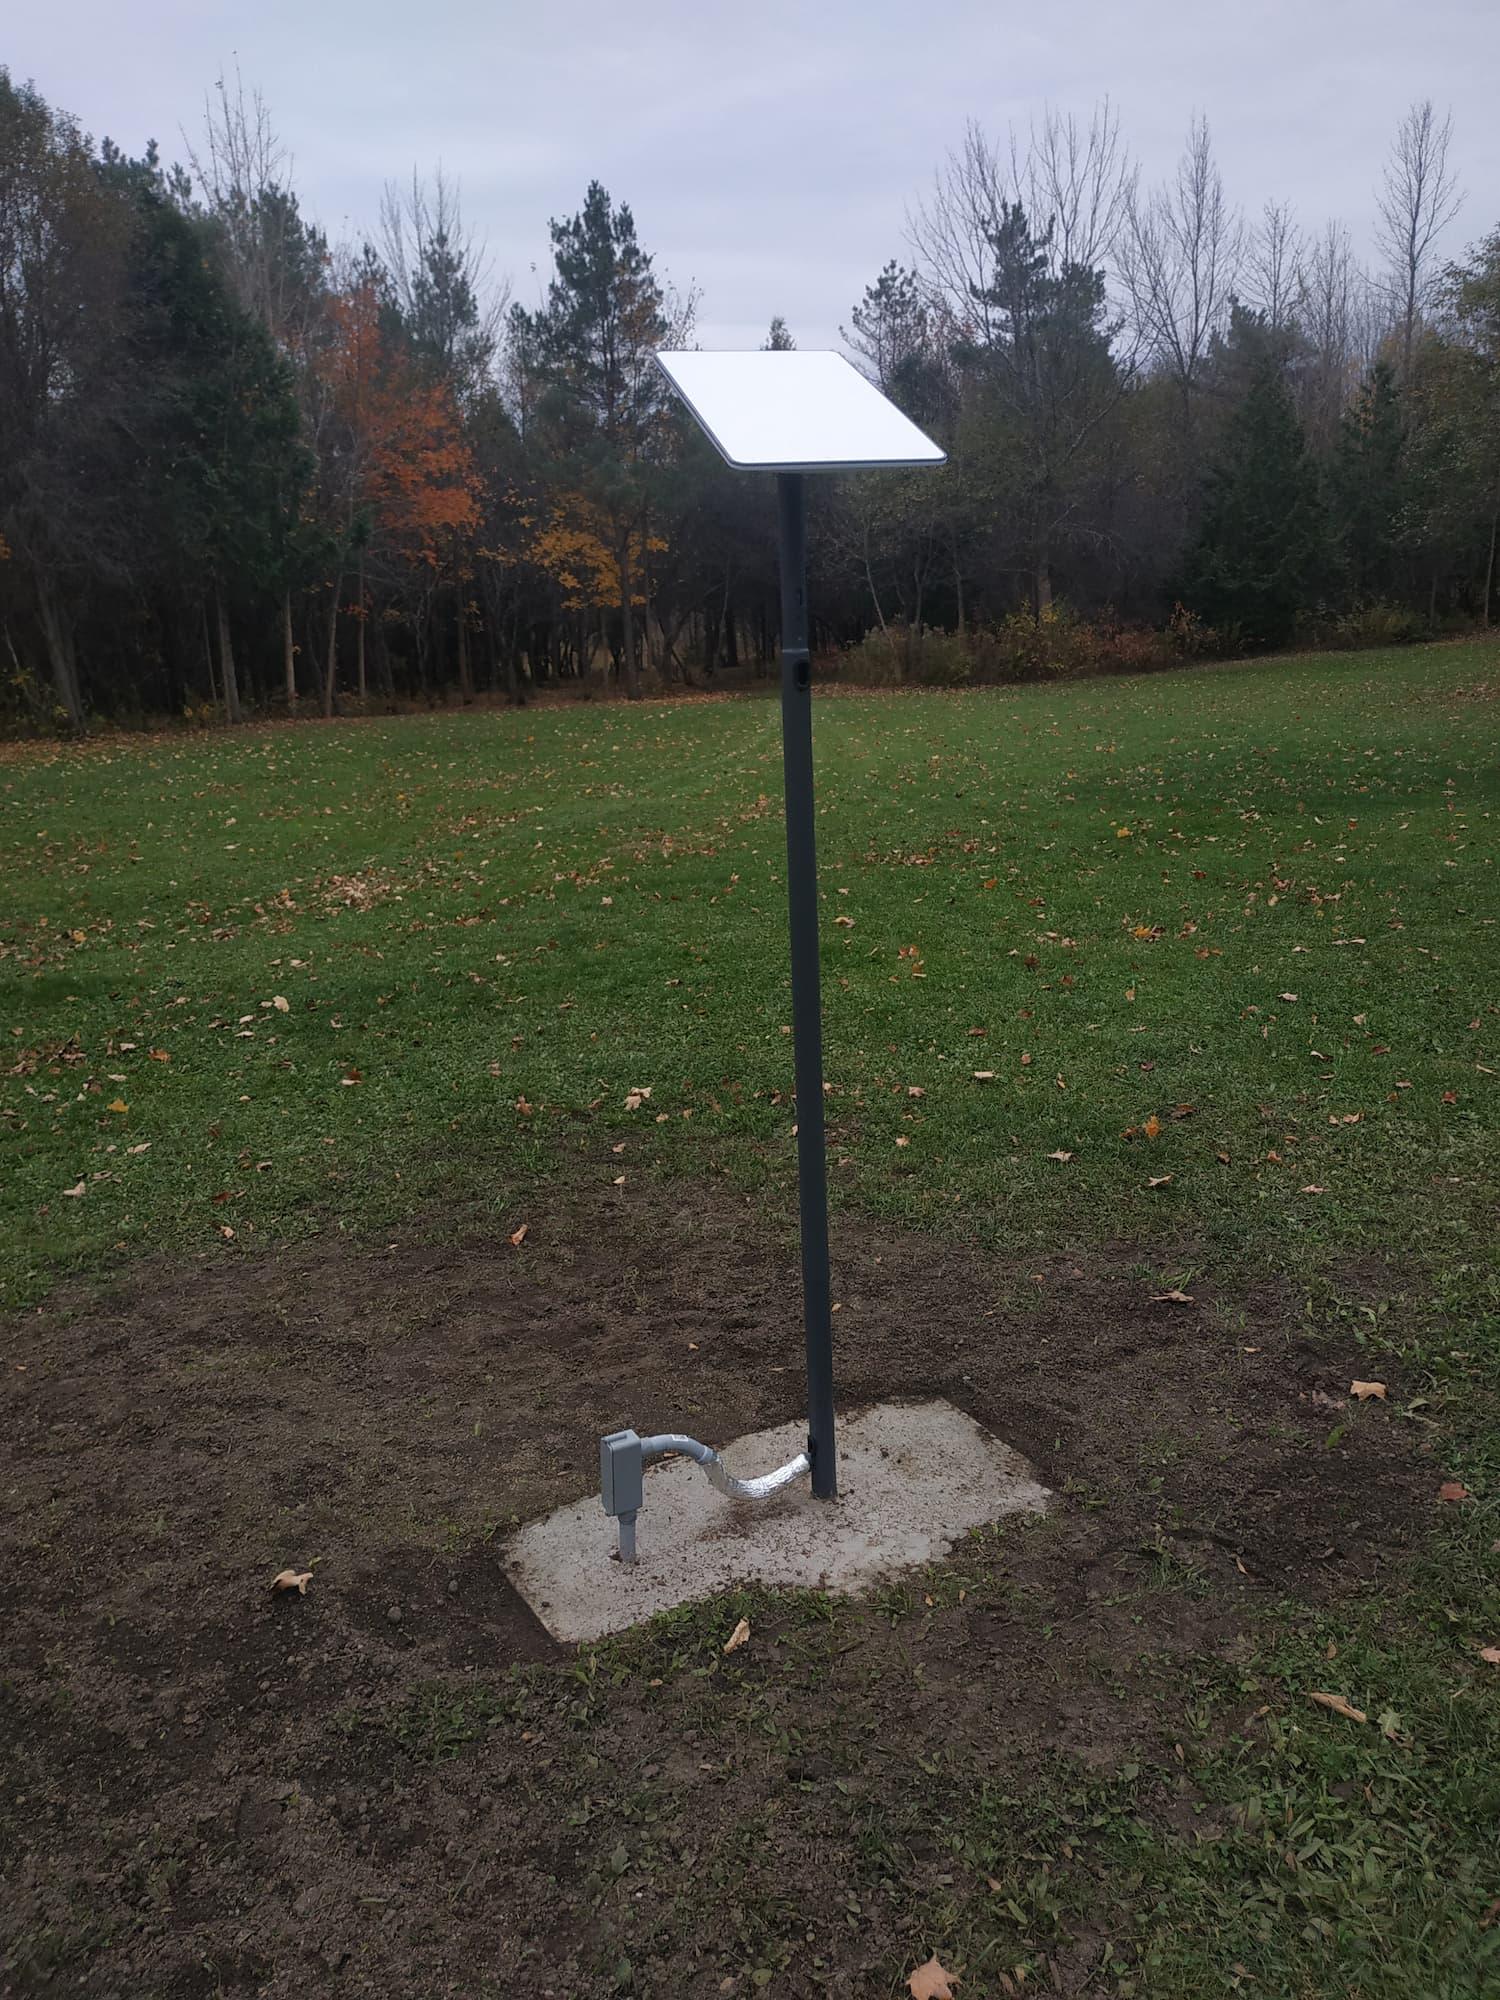 My white Starlink dish is positioned on a metal pole a few feet above the ground, with a cement pad below it. Part of a grey conduit is sticking up out of the ground, to which the wire is attached. The pole has been erected on a lawn